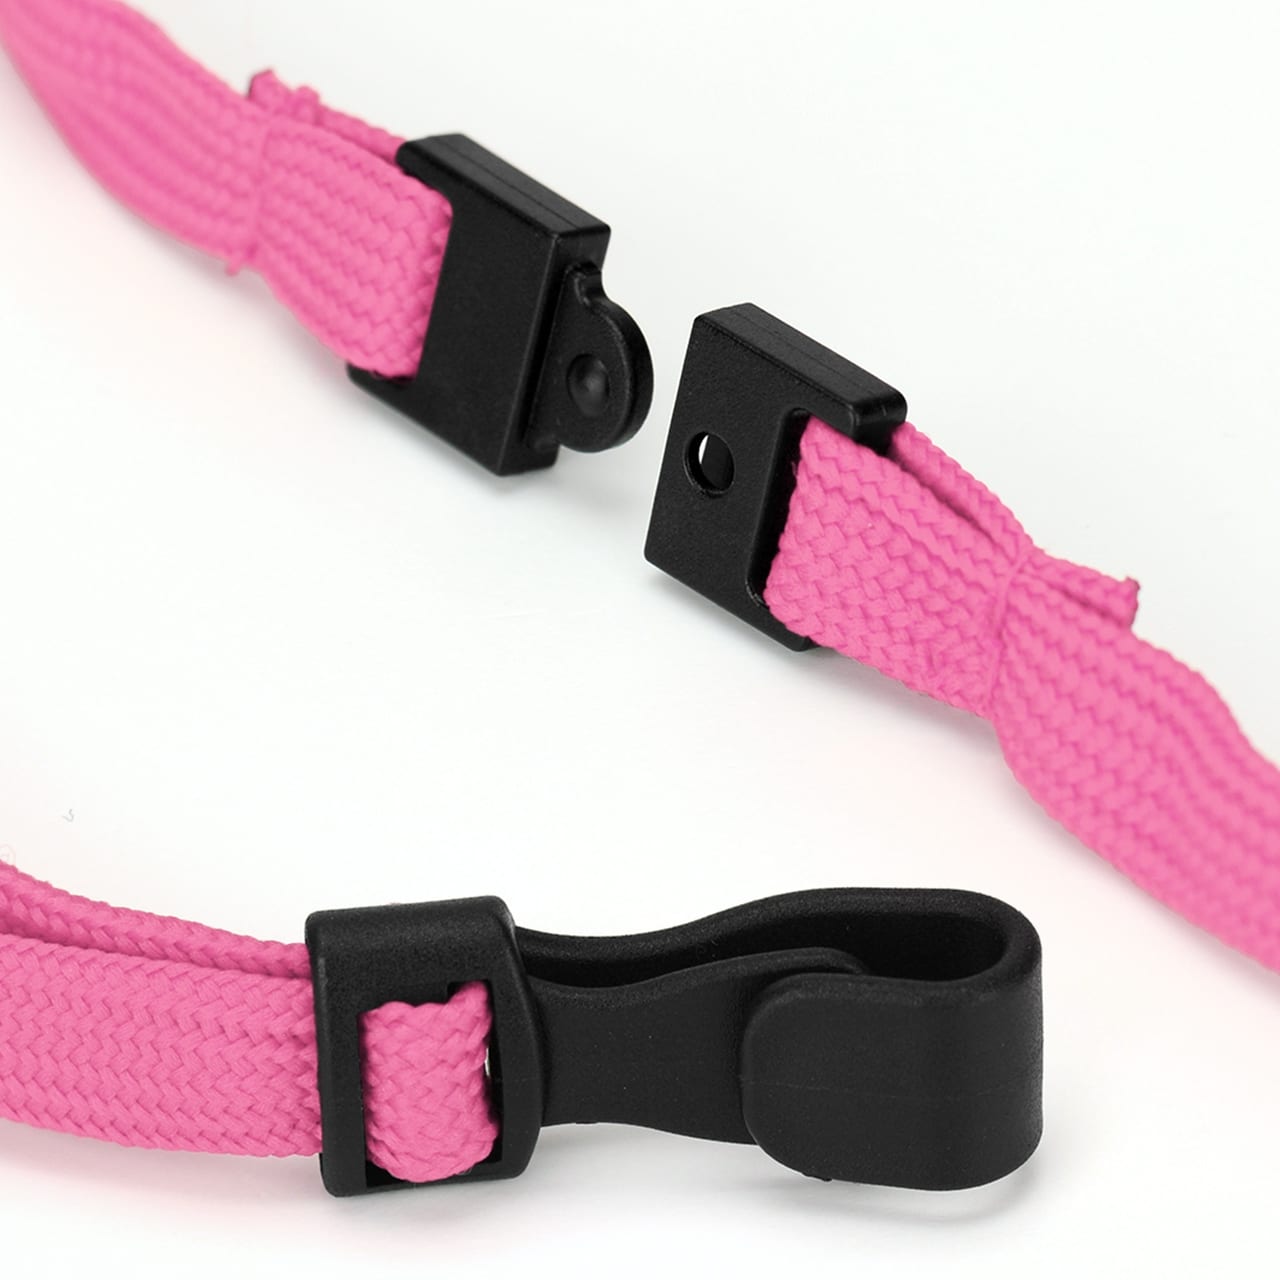 Lanyard Neck Strap with Breakaway & J Clip for ID Card Holders